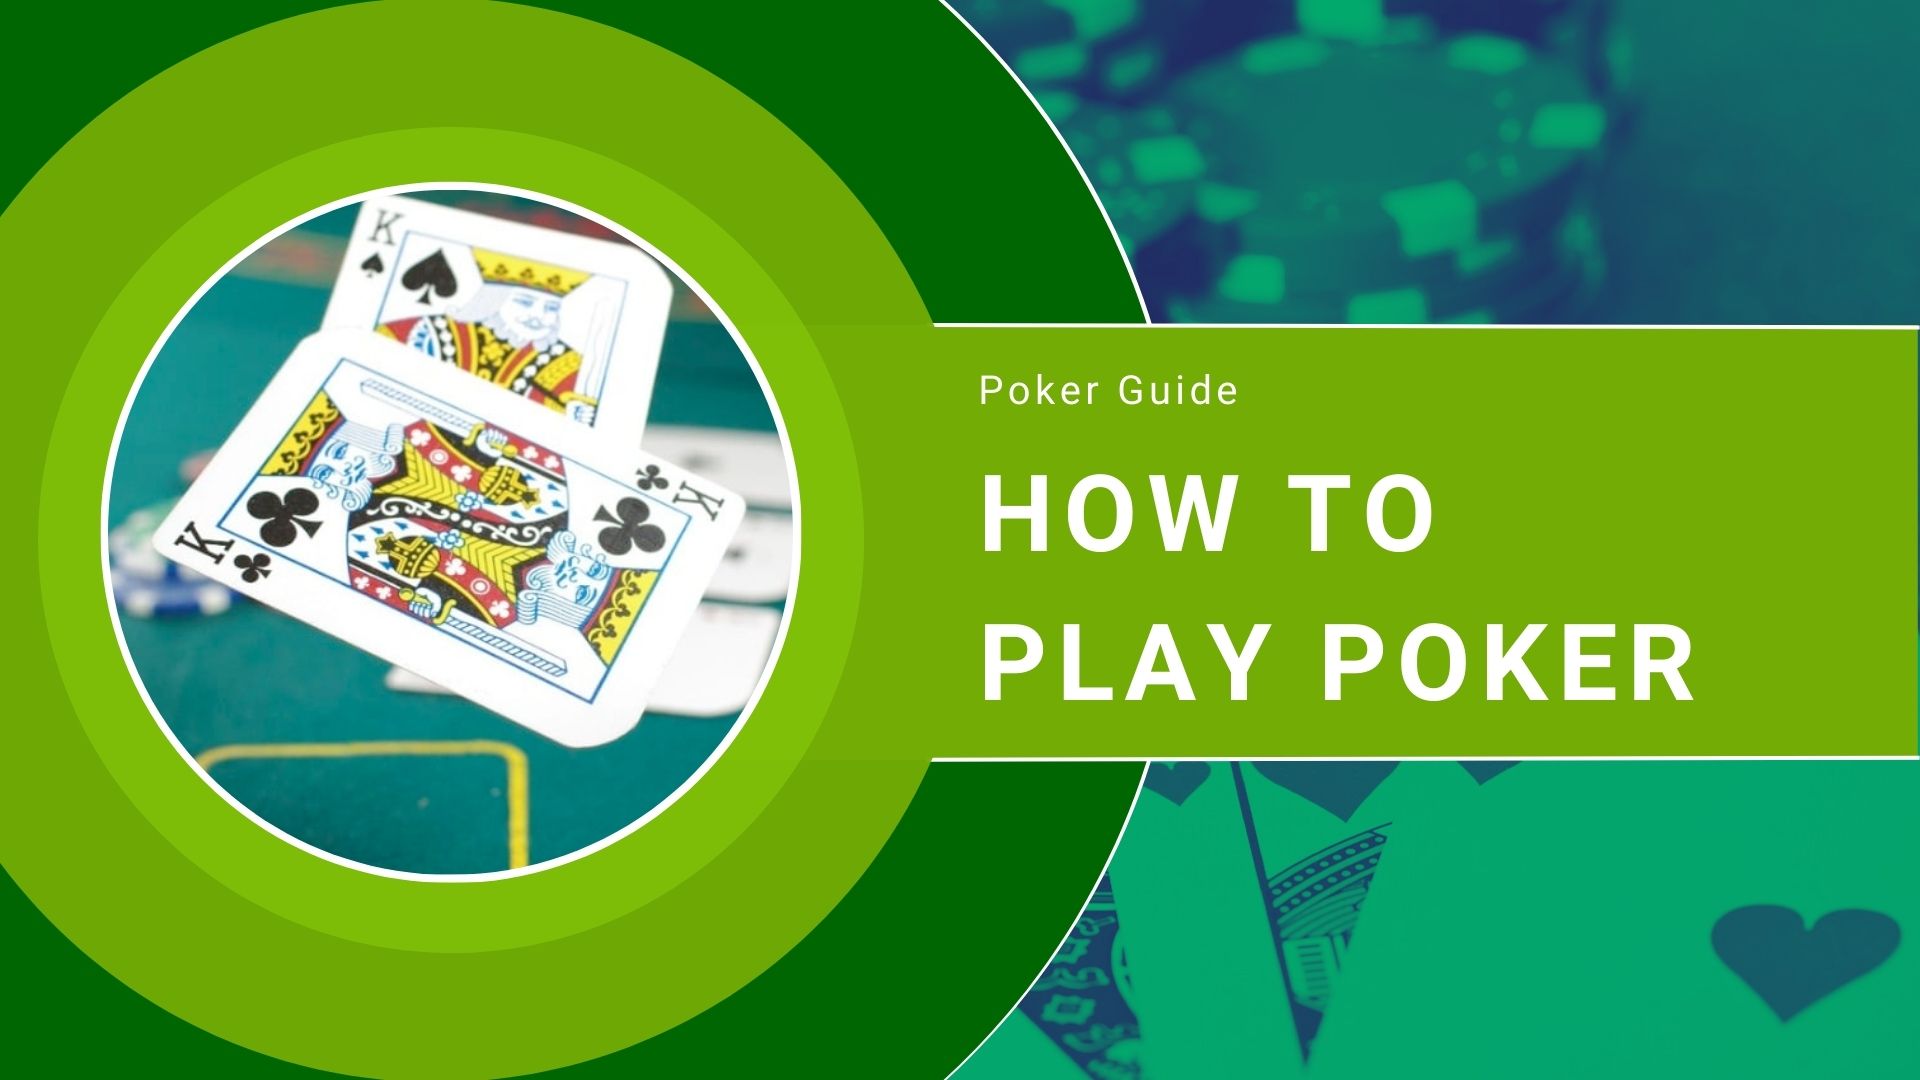 The most popular game of chance. How to play it. Poker